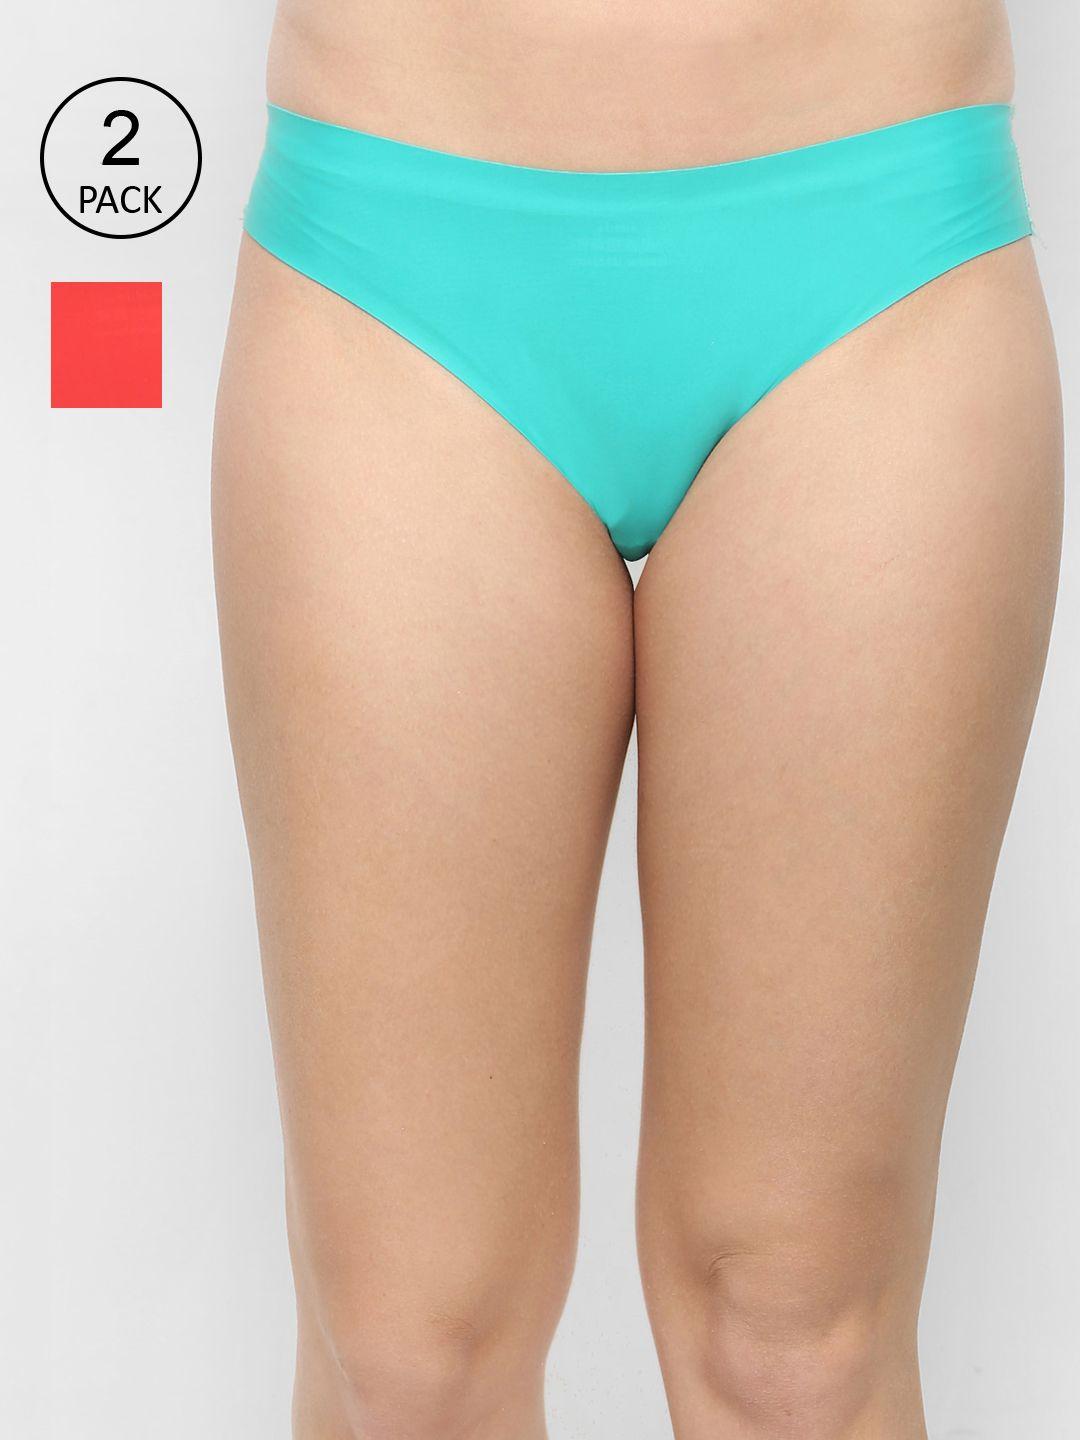 ms.lingies women pack of 2 sea green & red self design hipster briefs msp070-1516s